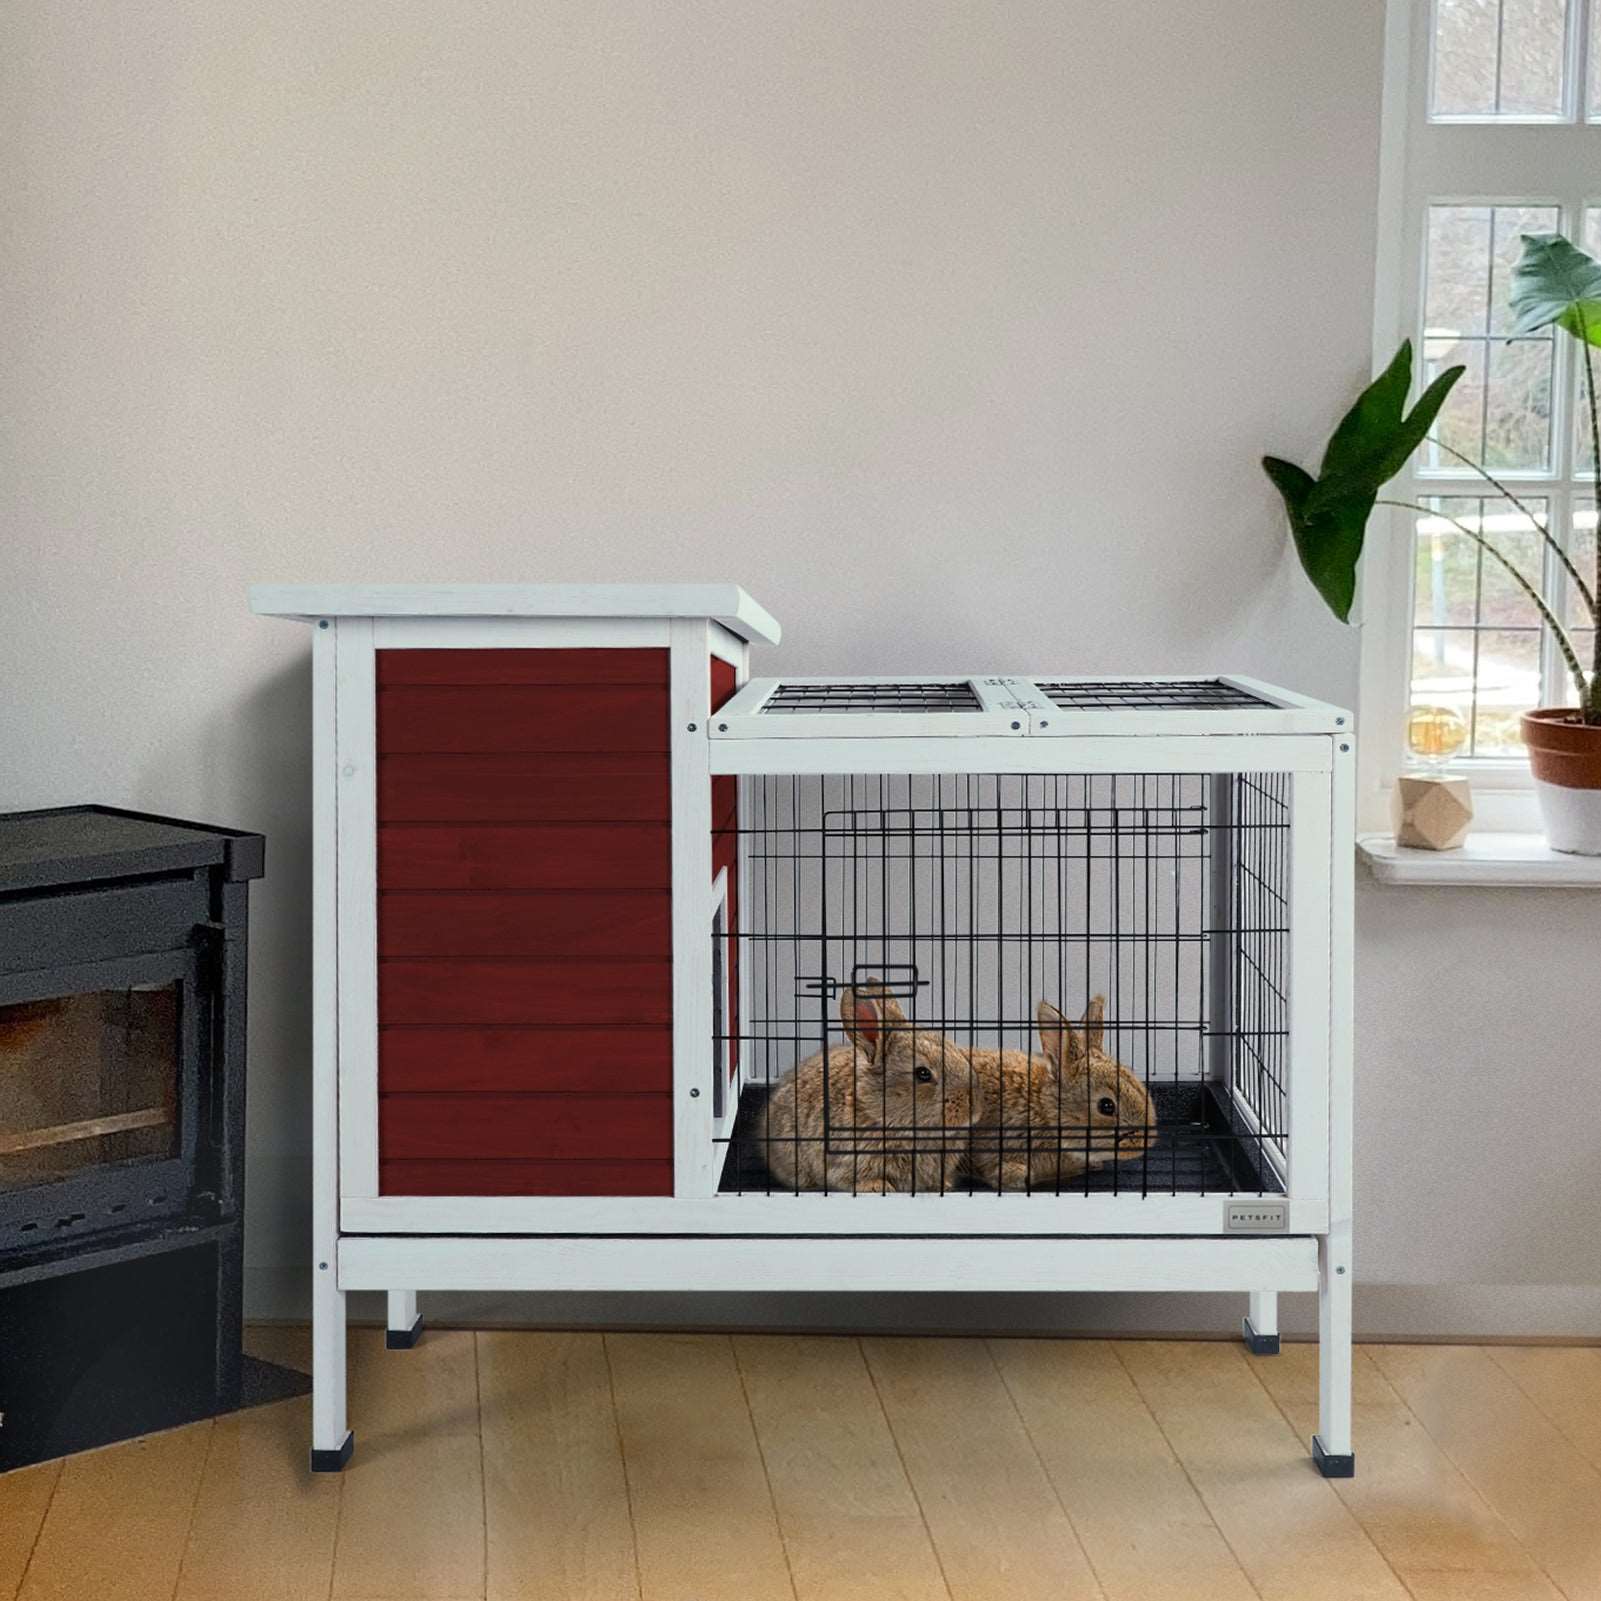 Petsfit-Guinea-Pig-Cage-Rabbit-Hutch-with-Pull-Out-Tray-06